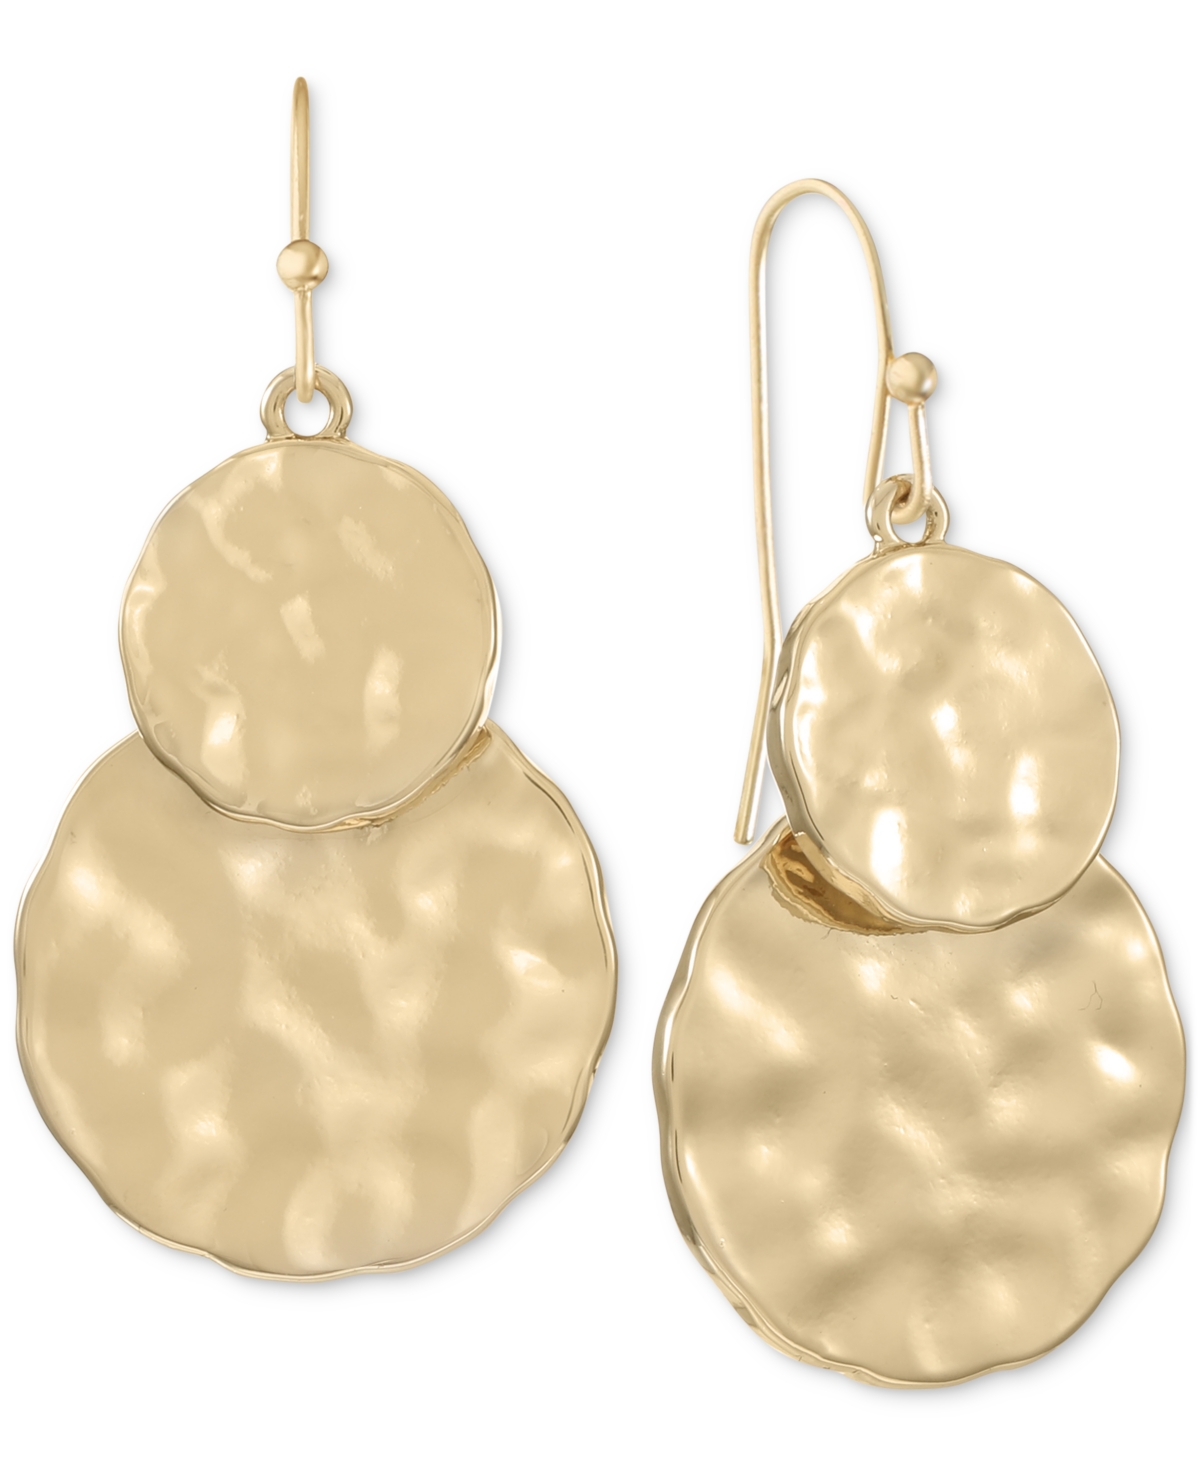 Gold-Tone Double Hammered Disc Drop Earrings, Created for Macy's - Gold